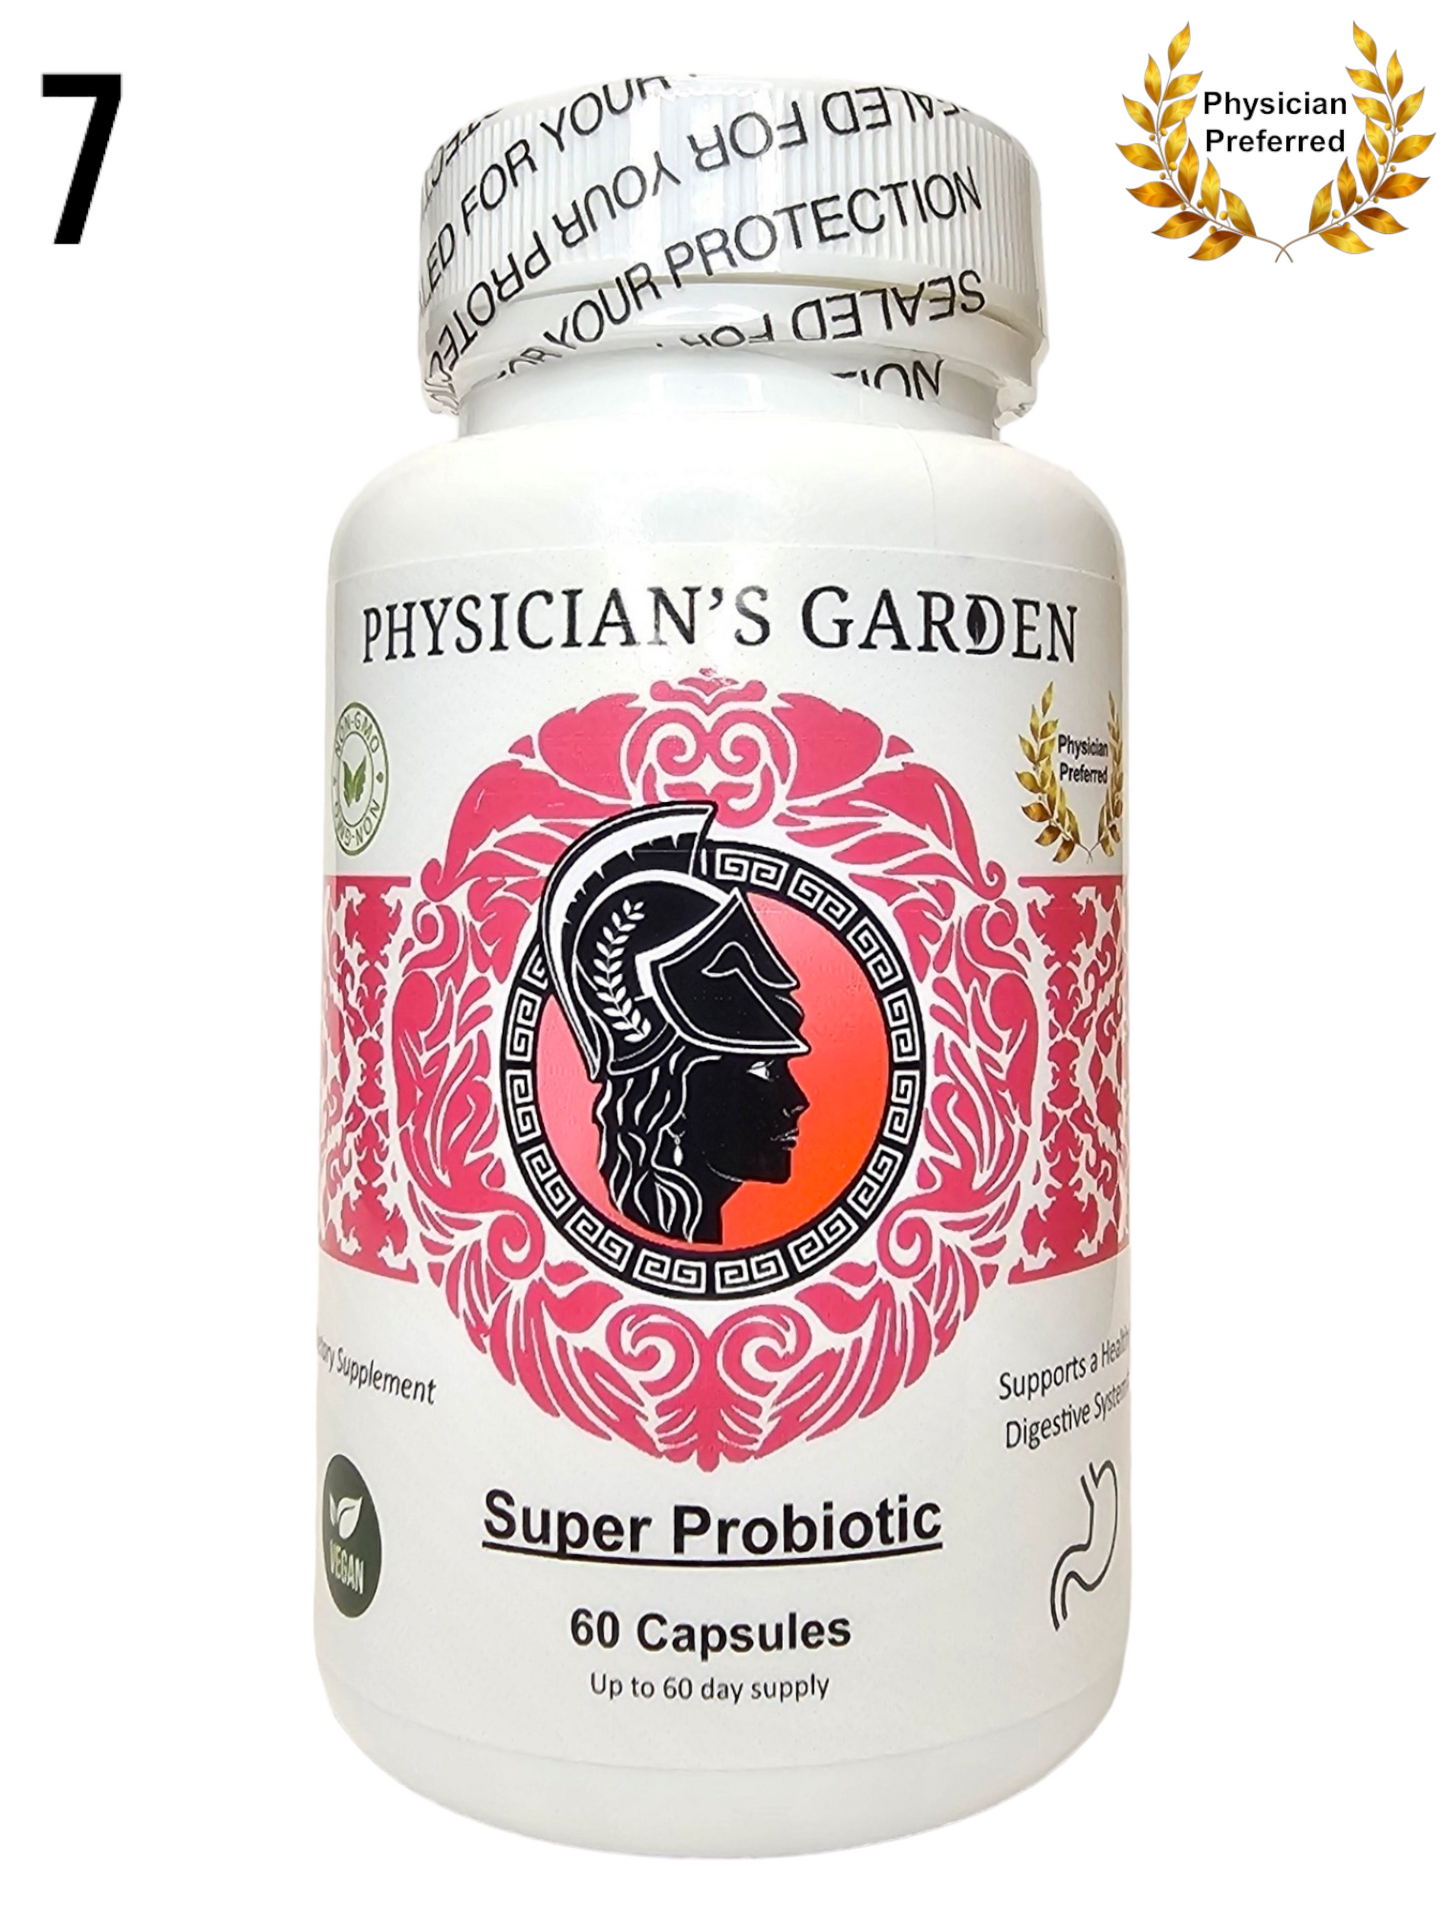 07) Super Probiotic - Supports Healthy Digestive System